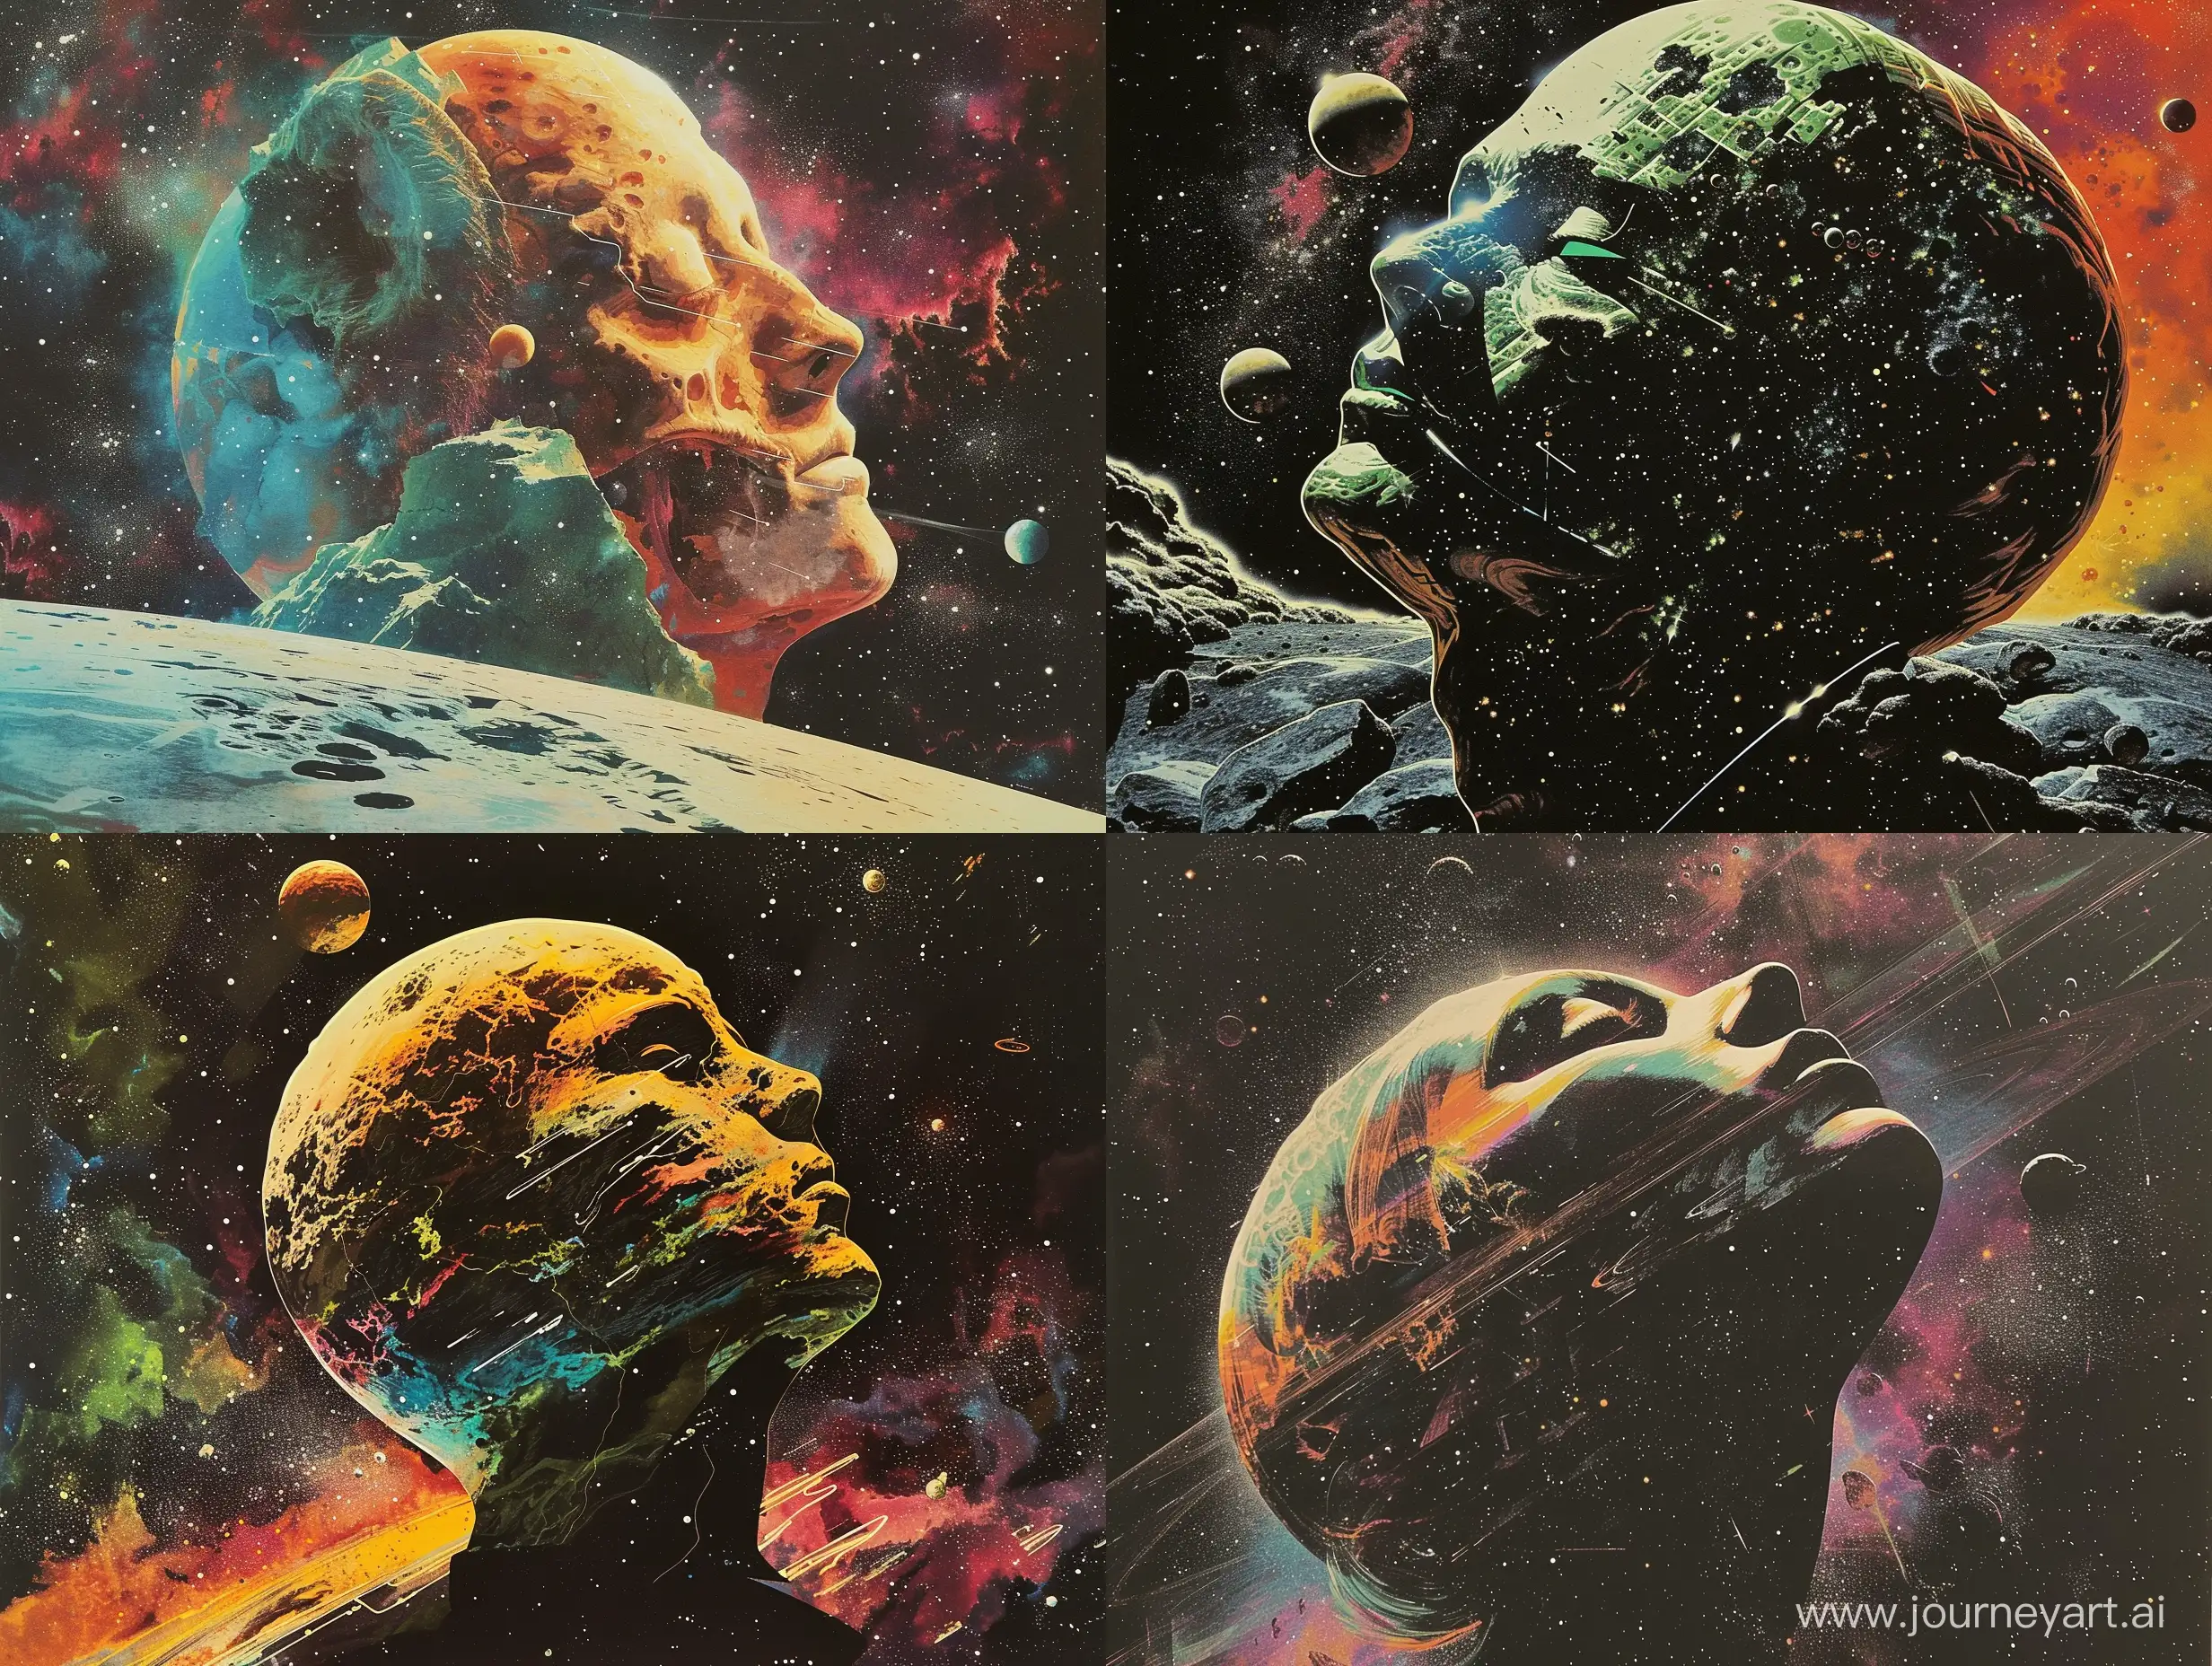 Surreal-Vintage-Synthwave-Artwork-Giant-Head-in-Space-Poster